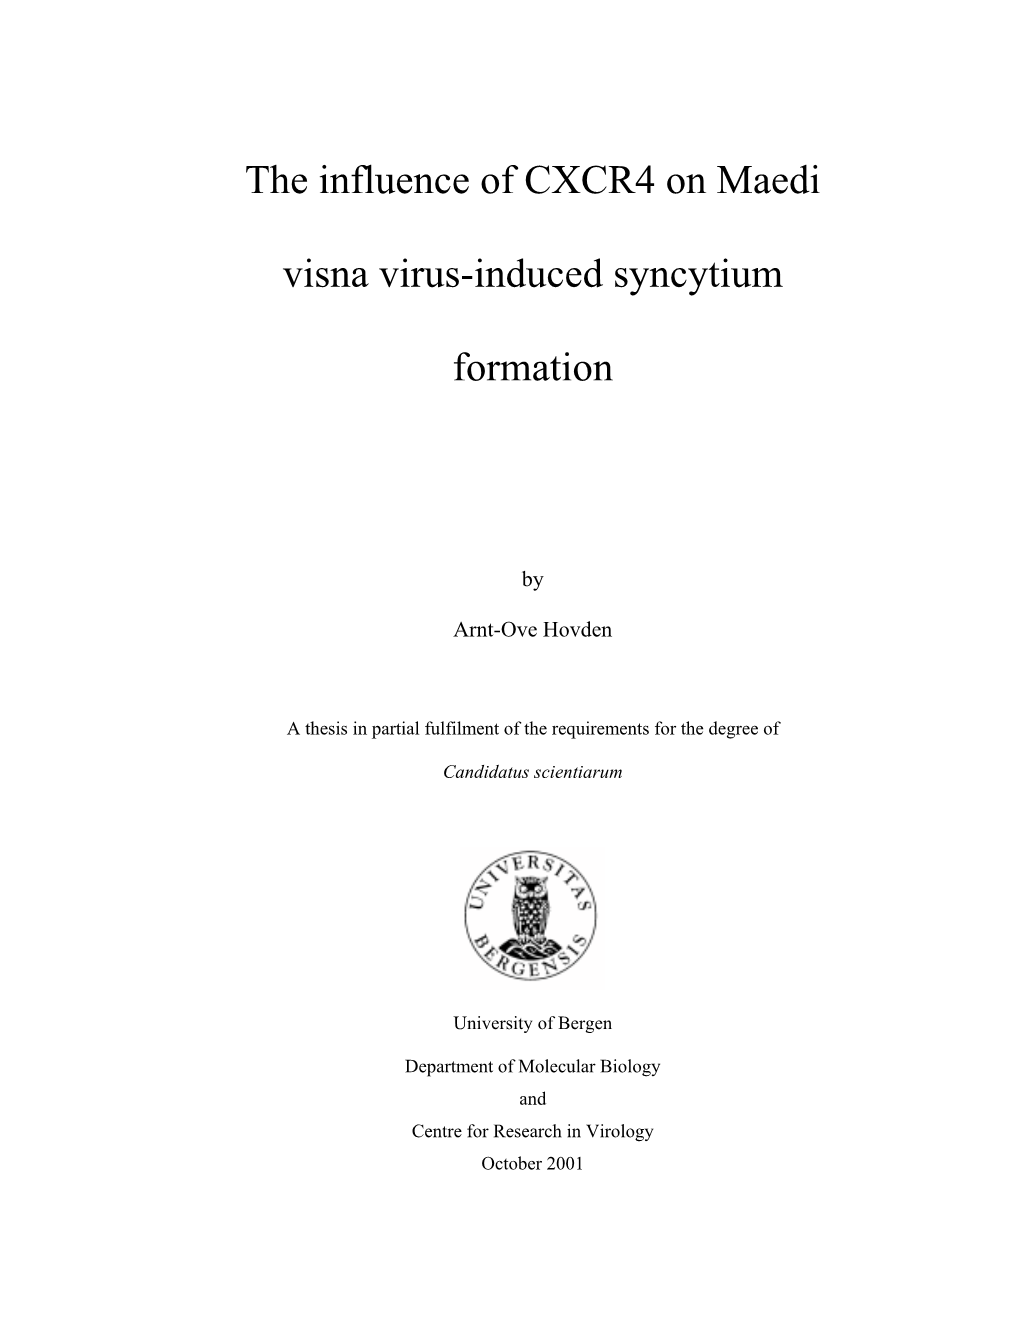 The Influence of CXCR4 on Maedi Visna Virus-Induced Syncytium